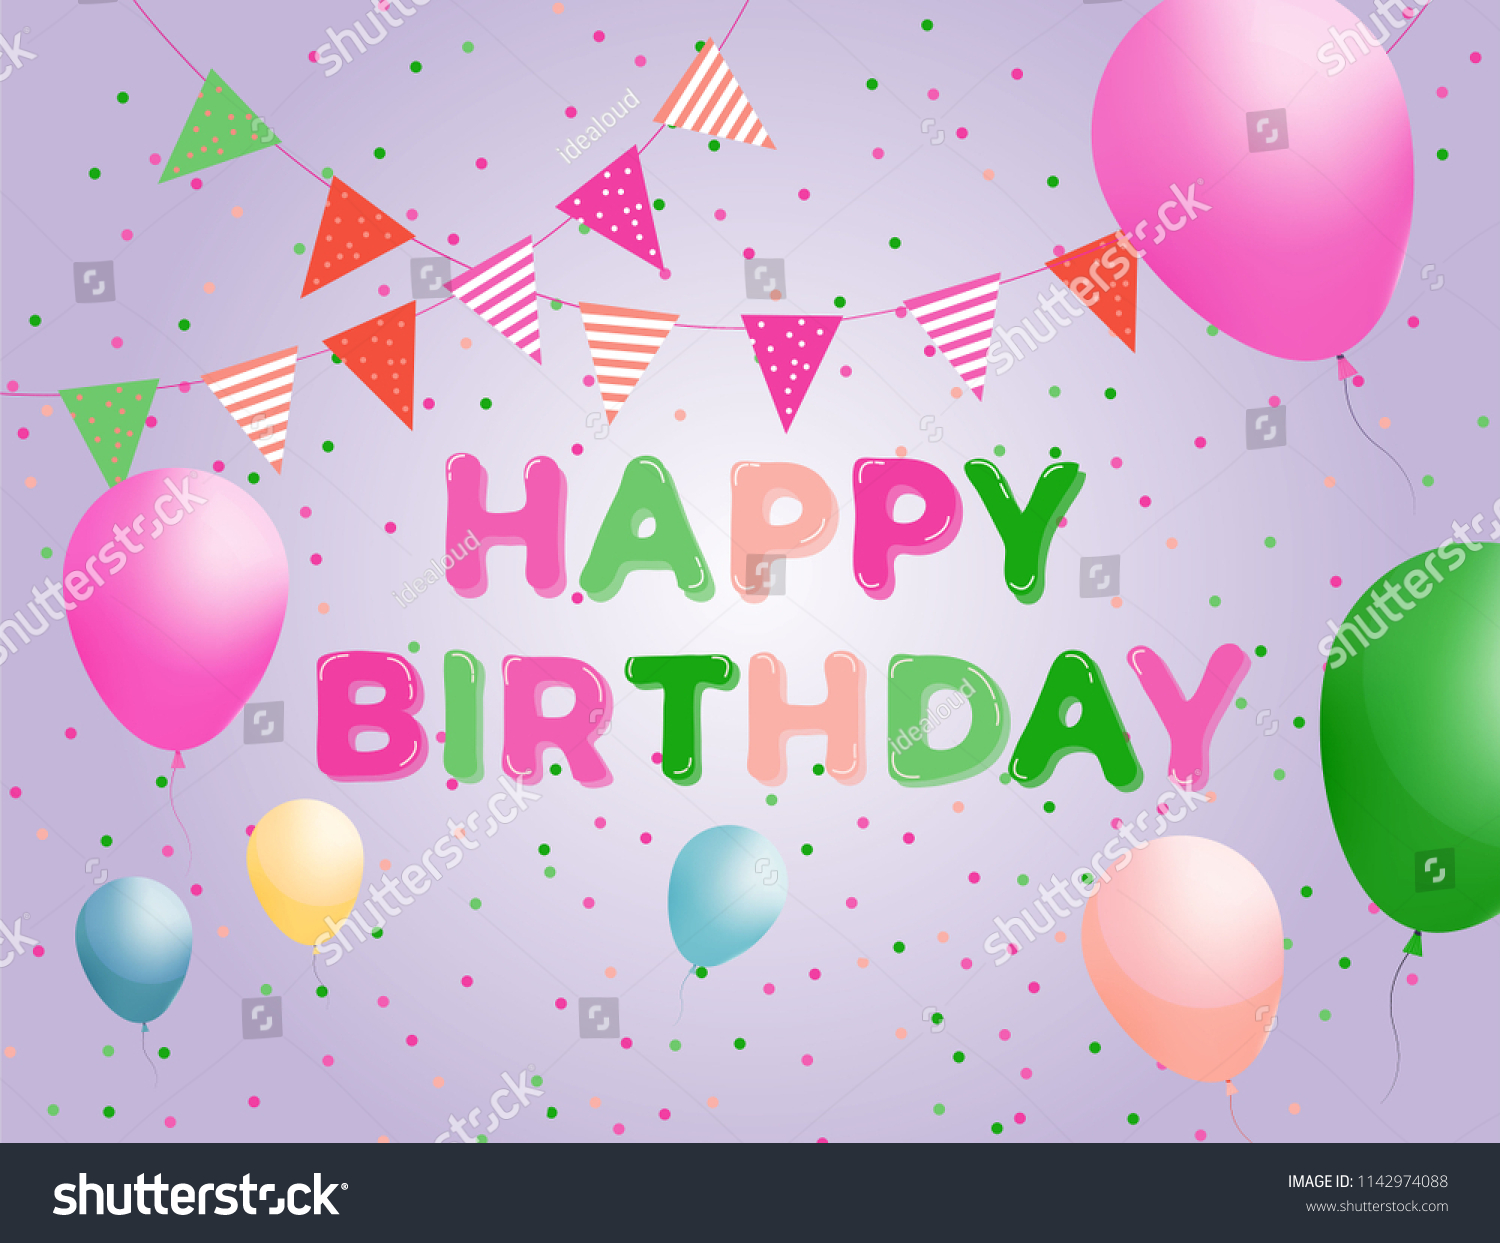 Birthday Poster Design Template from image.shutterstock.com